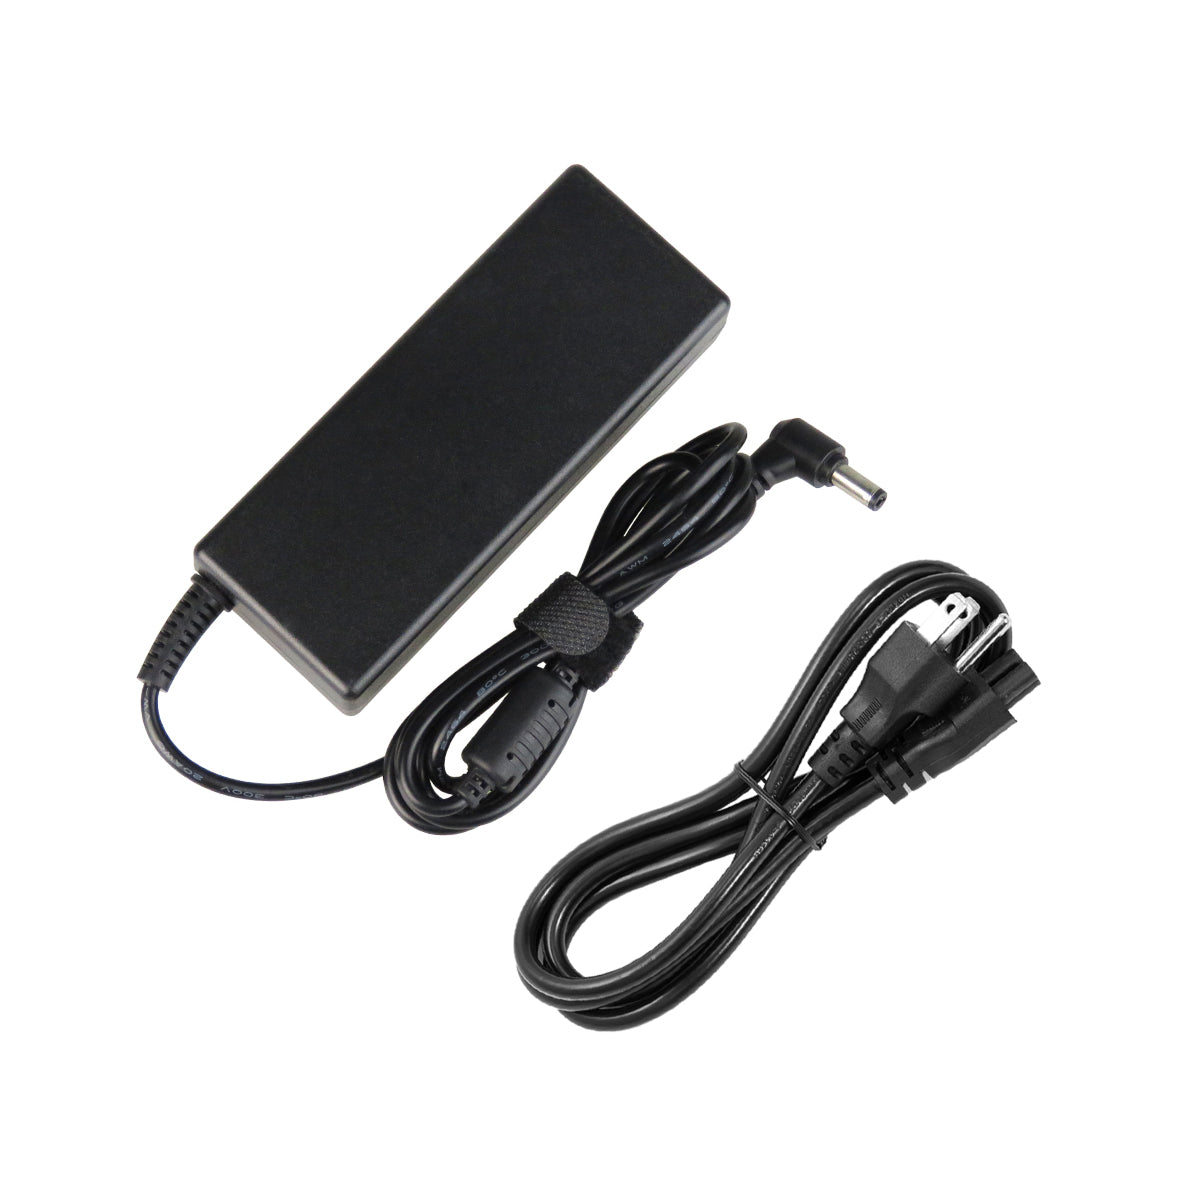 AC Adapter Charger for ASUS K53SM Notebook.